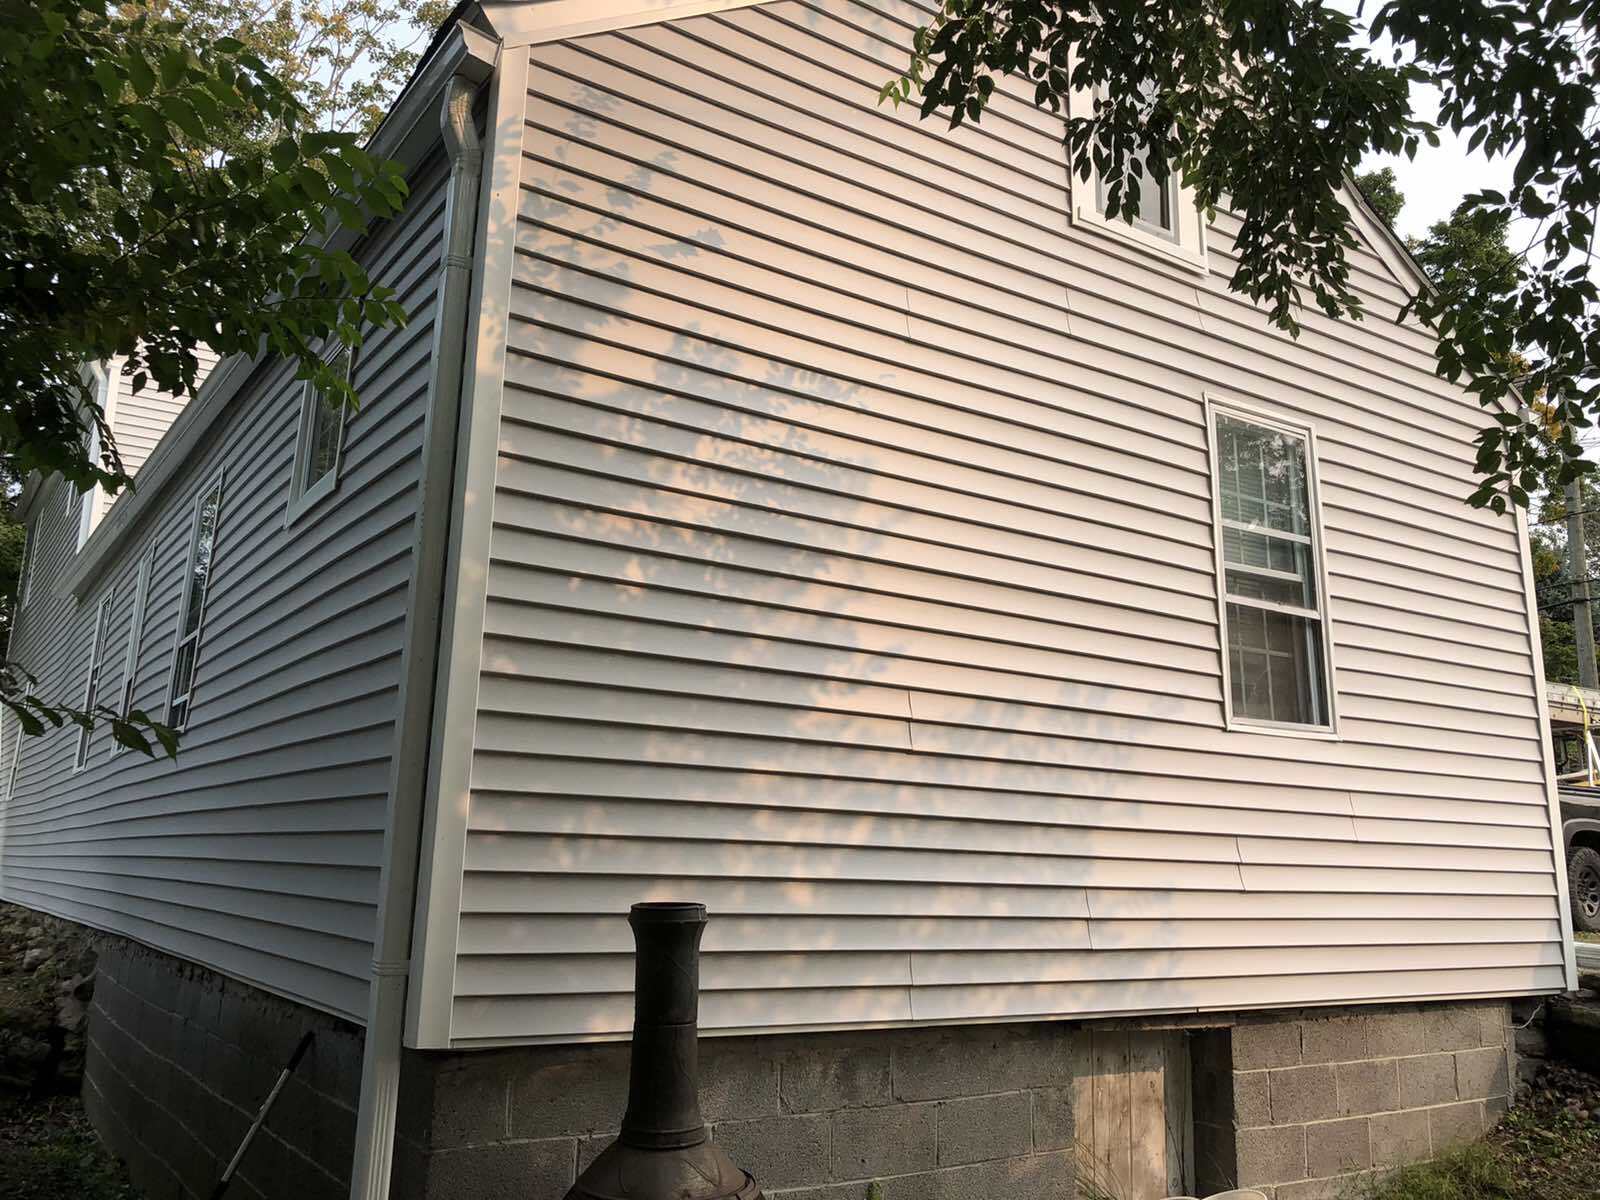 New siding provides a clean and beautiful look.